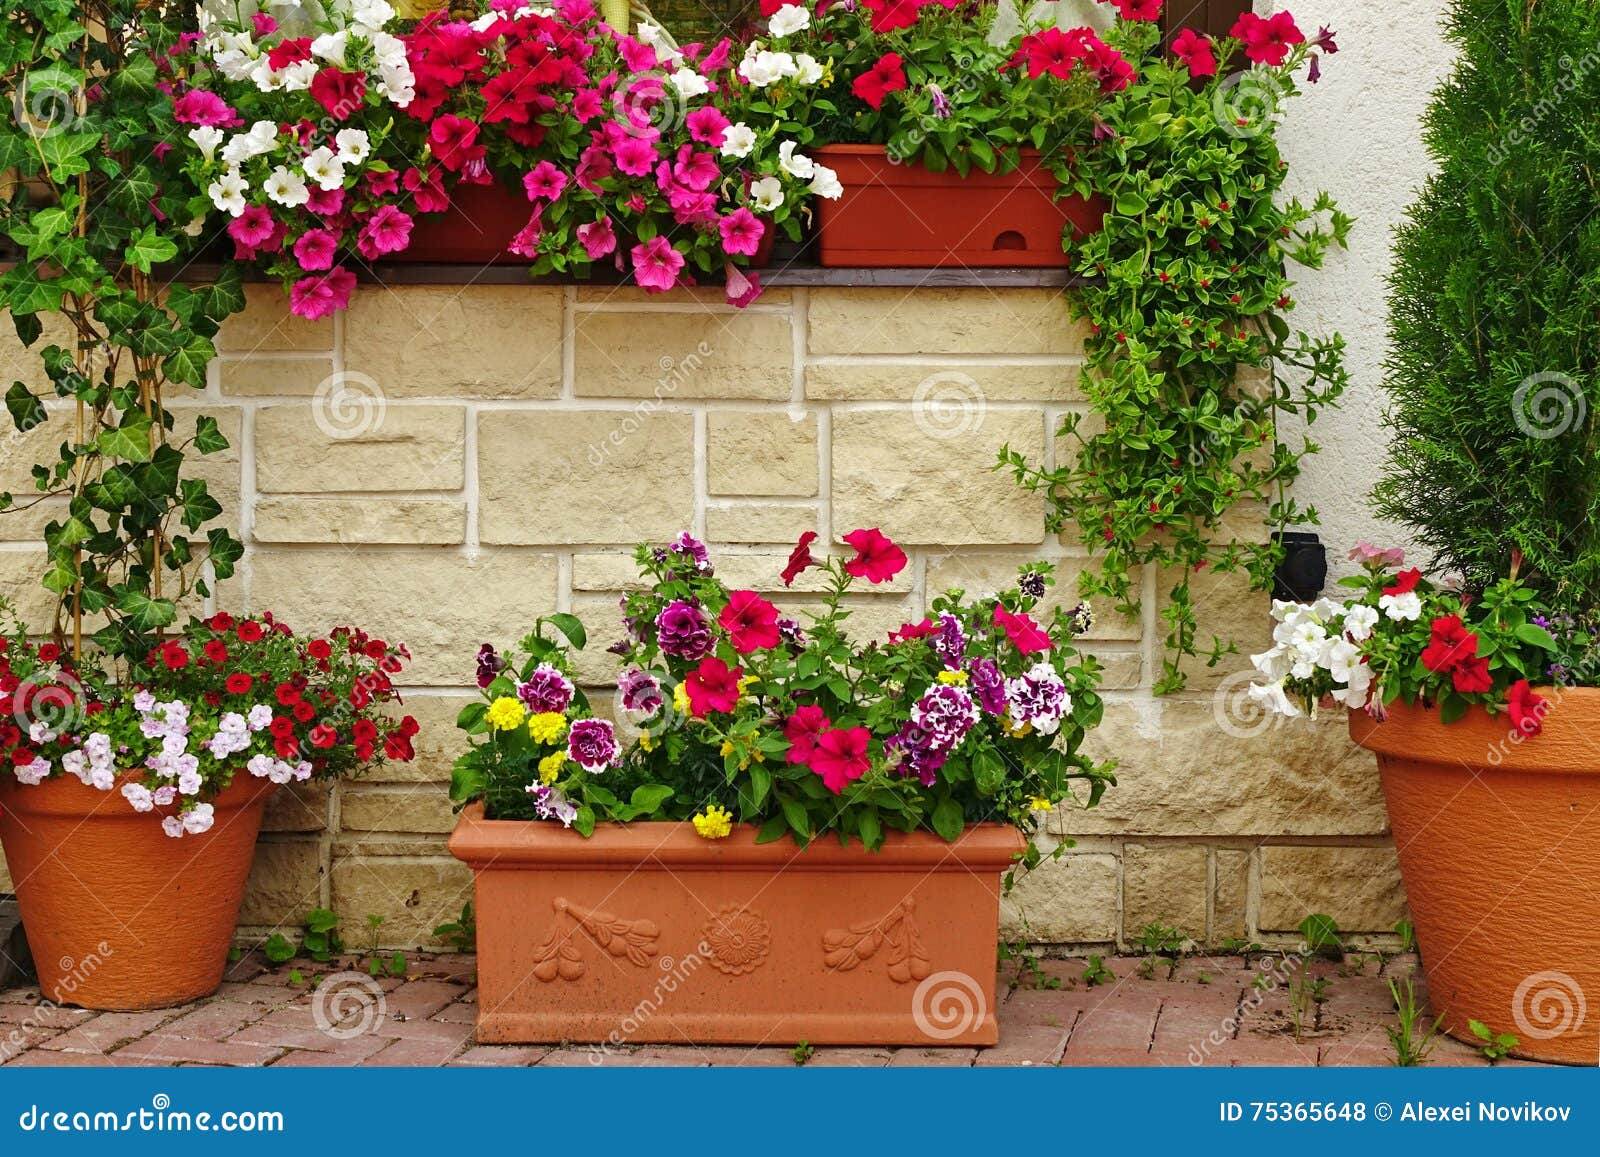 many clay flowerpots with blooming plants at stone wall